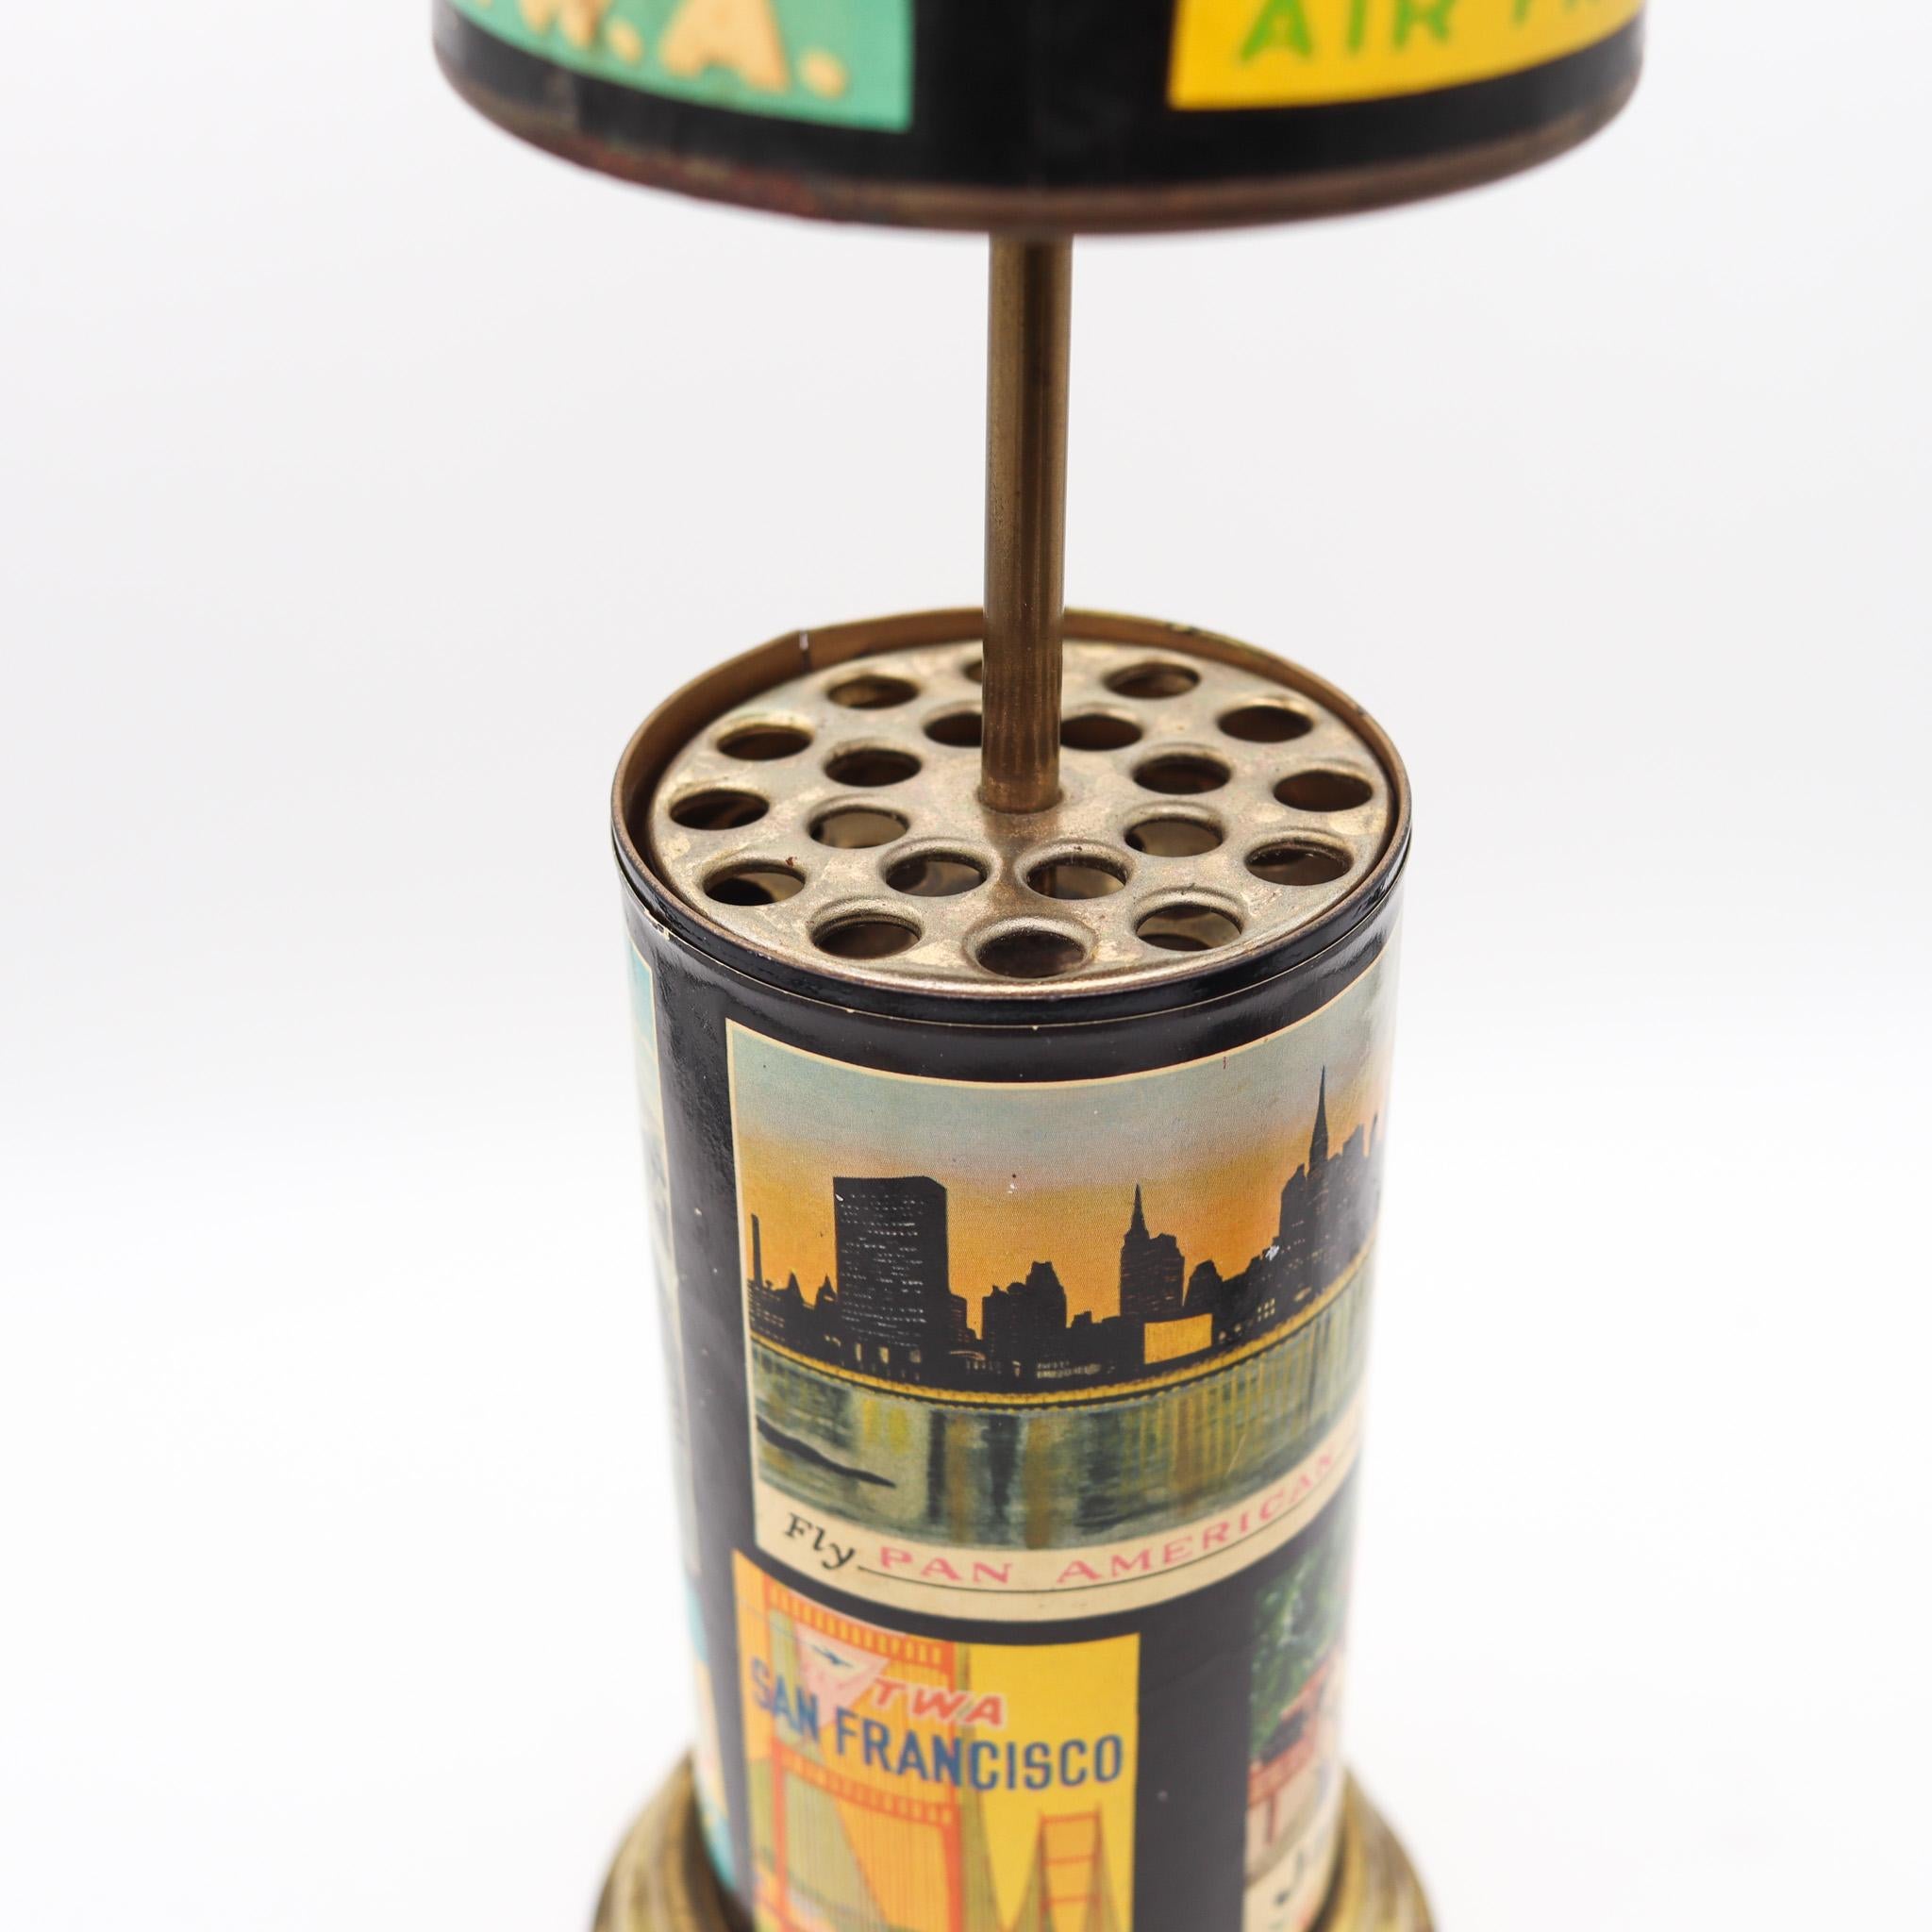 Mechanical cigarette dispenser box.

An attractive and very beautiful desk piece, created in France during the art deco period, back in the 1930's. This rare mechanical cigarettes dispenser box has been made in the shape of an iconic Parisian